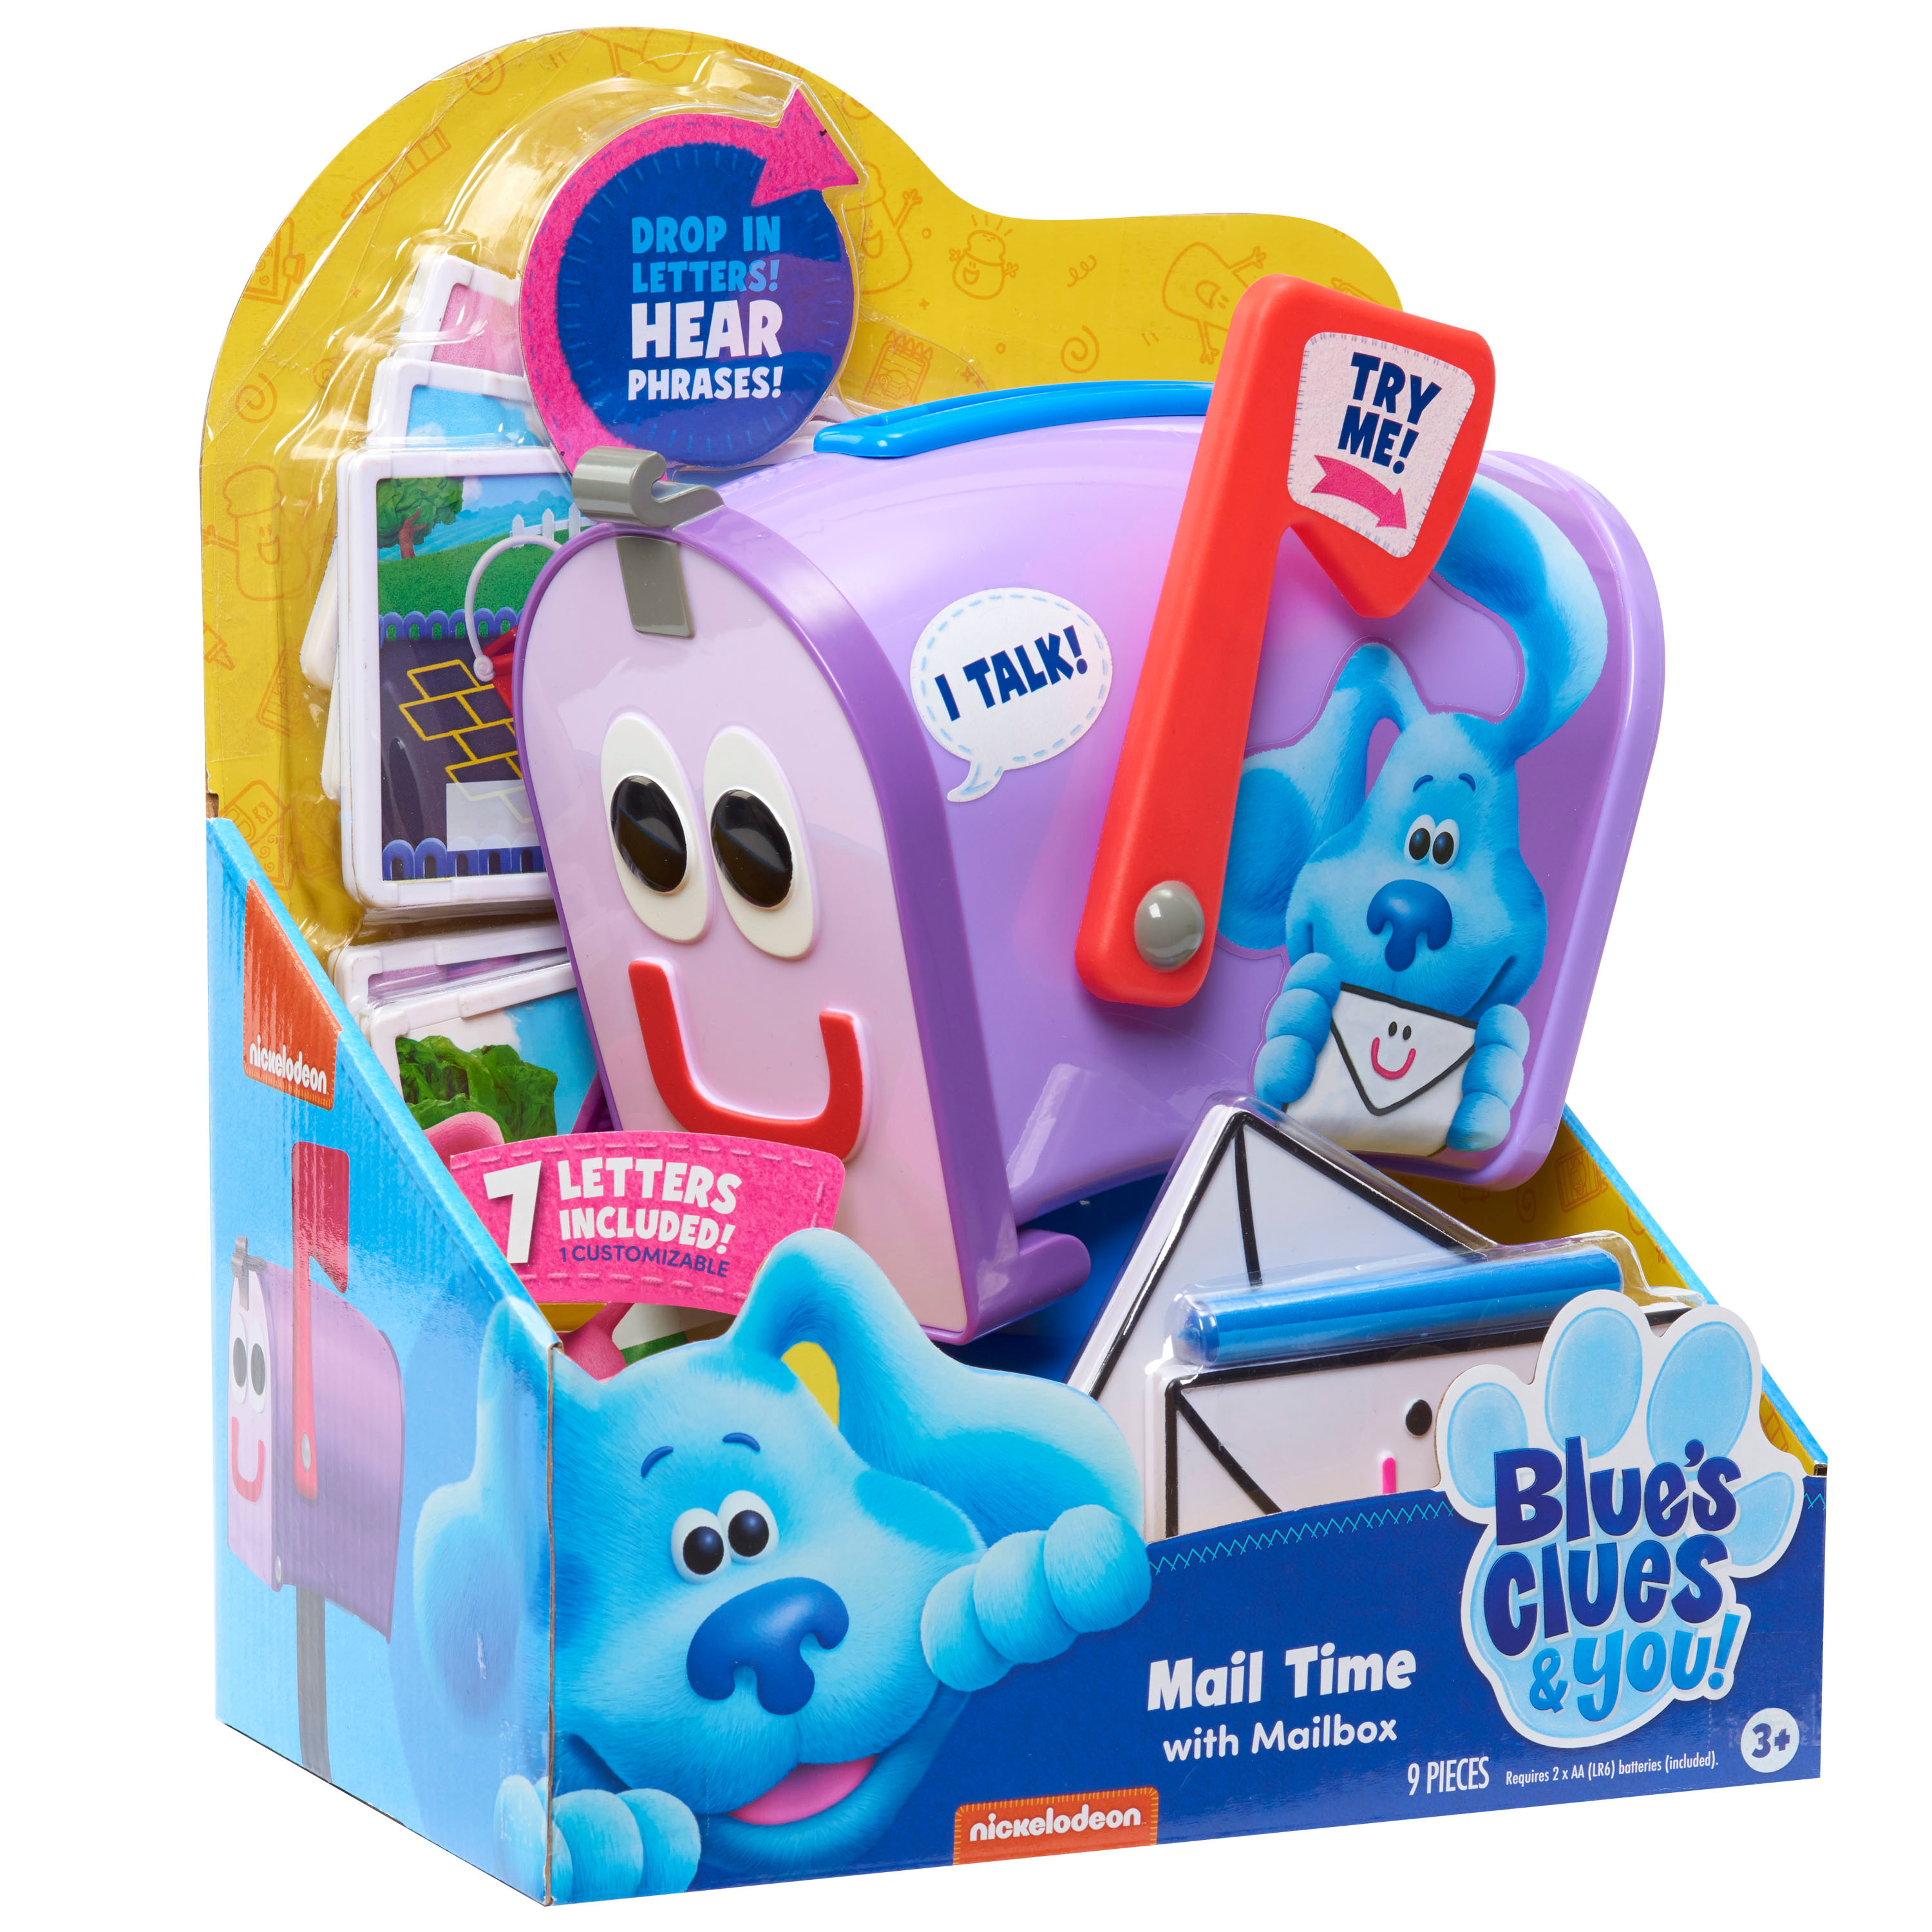 Blue's Clues & You! Mail Time with Mailbox Toy for Kids with Sound,  Kids Toys for Ages 3 Up, Gifts and Presents - image 8 of 8